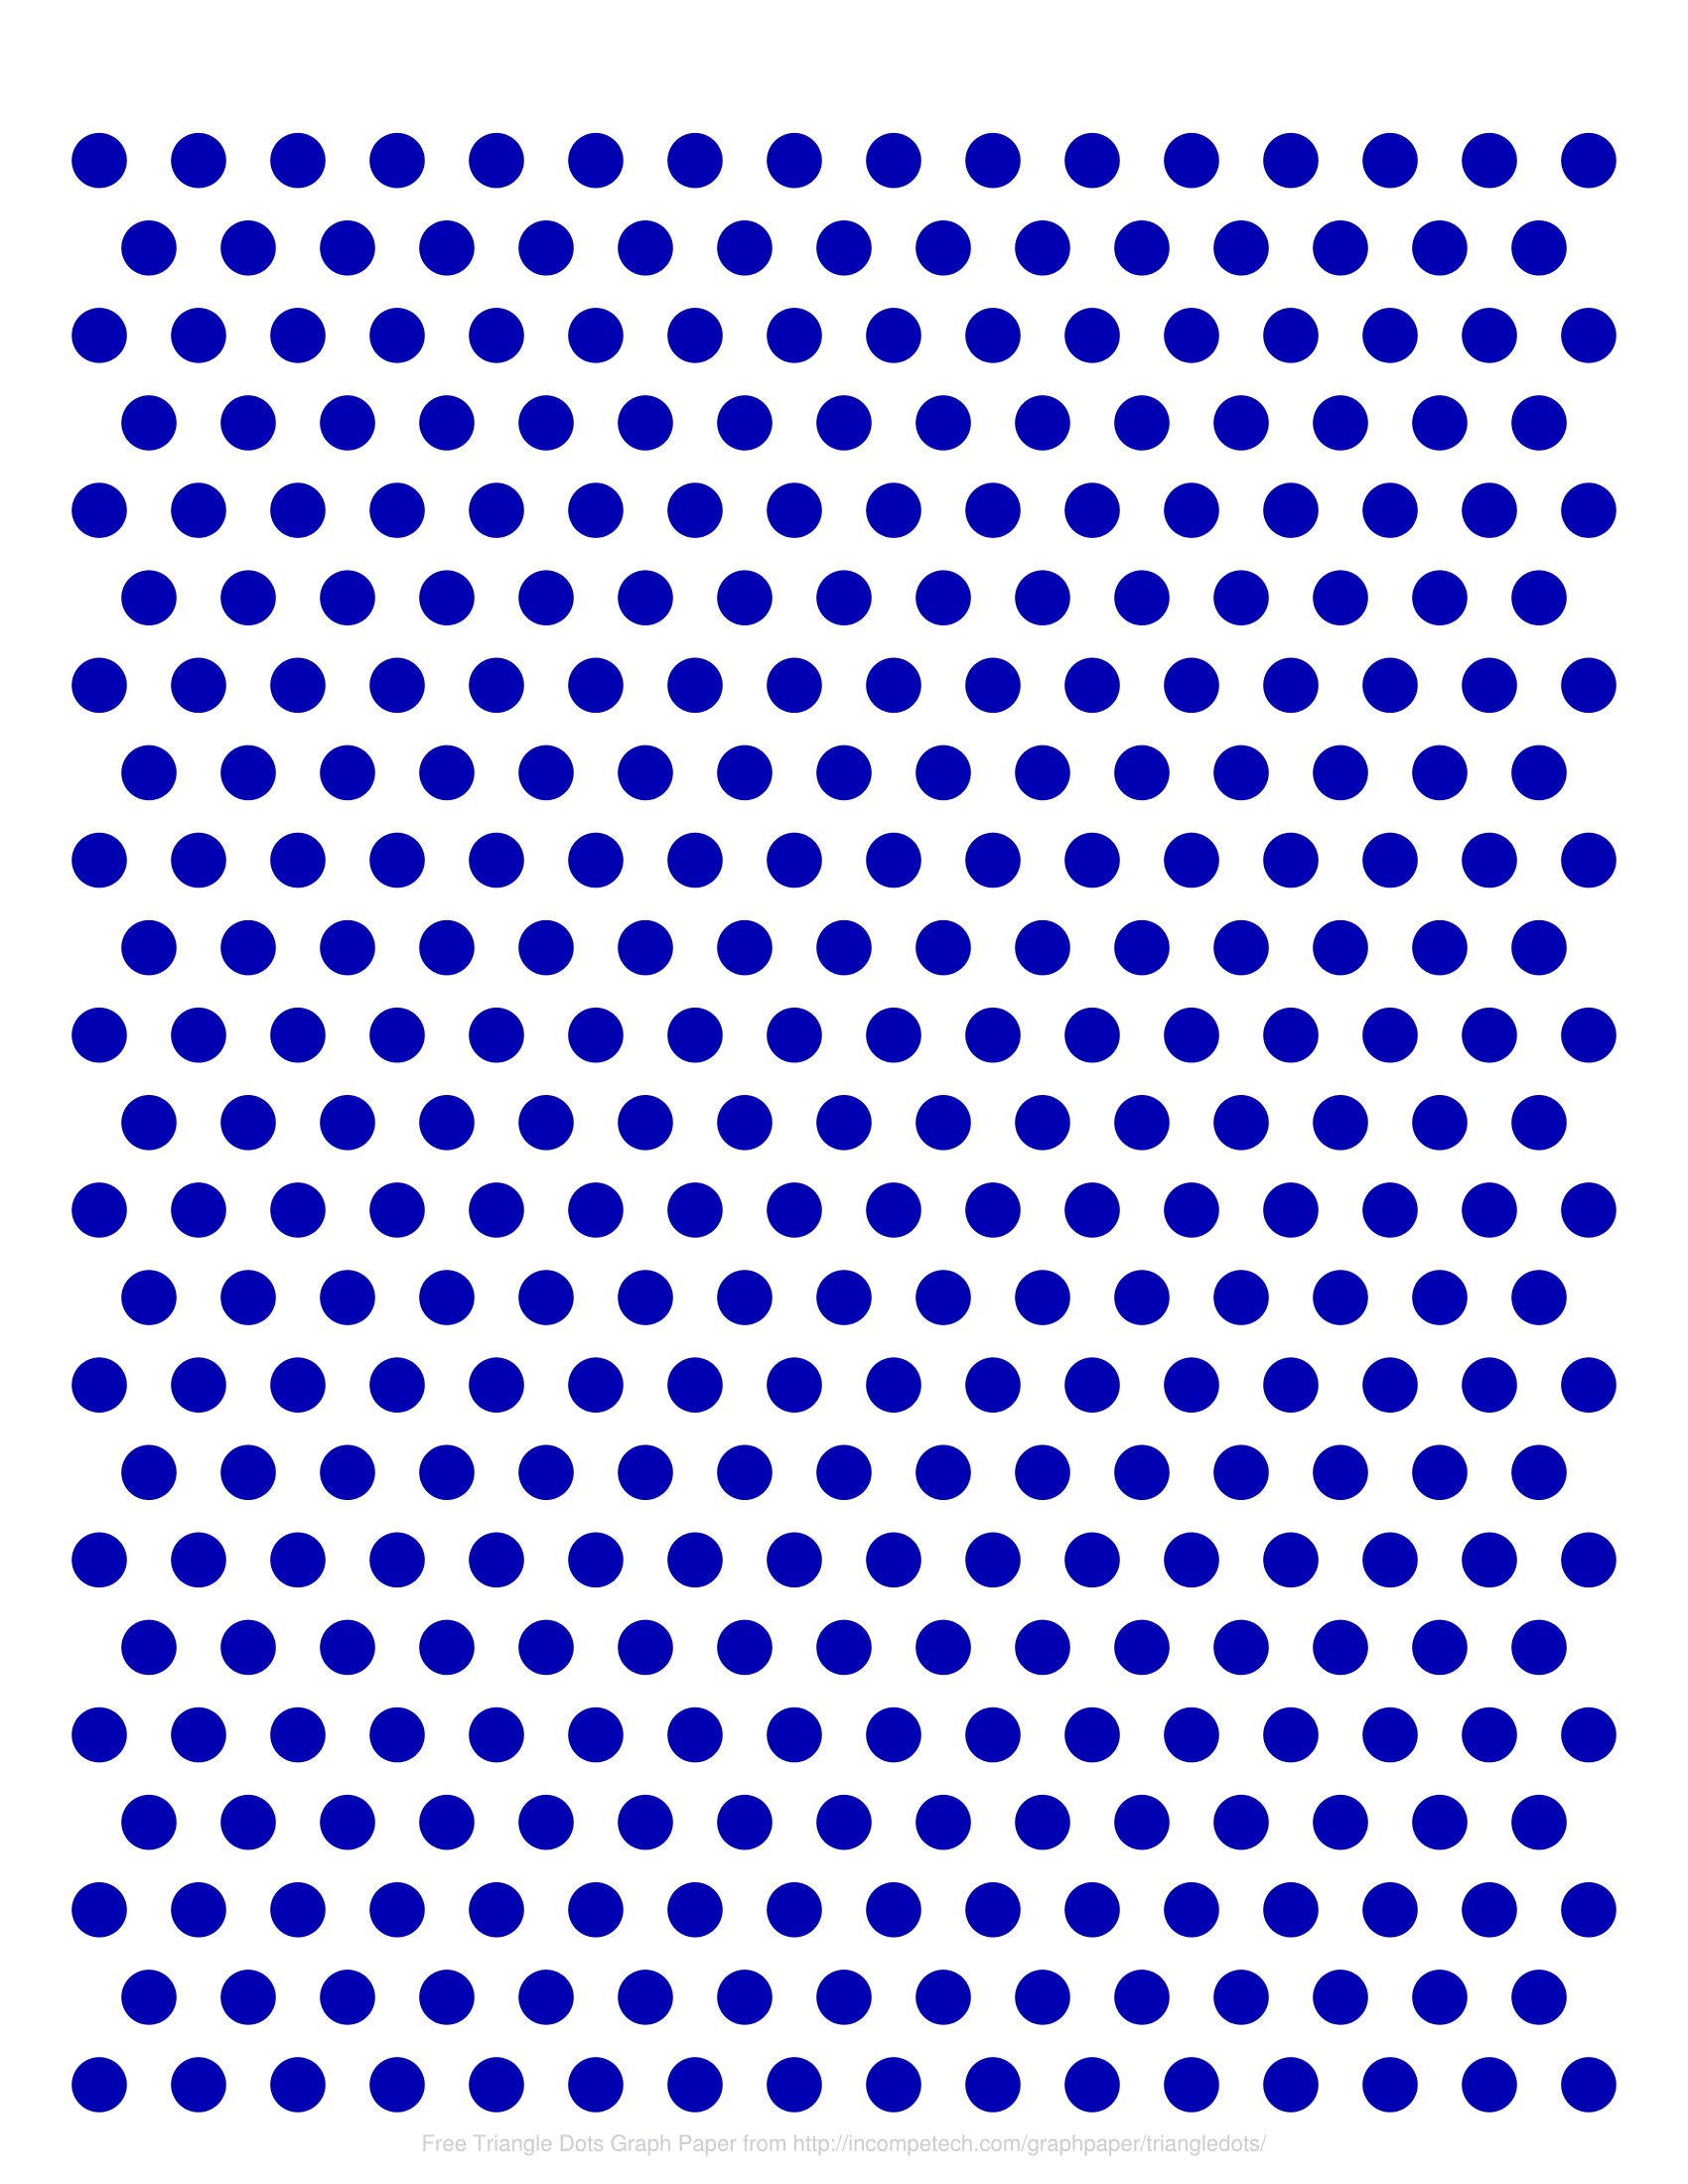 Free Online Graph Paper / Triangle Dots